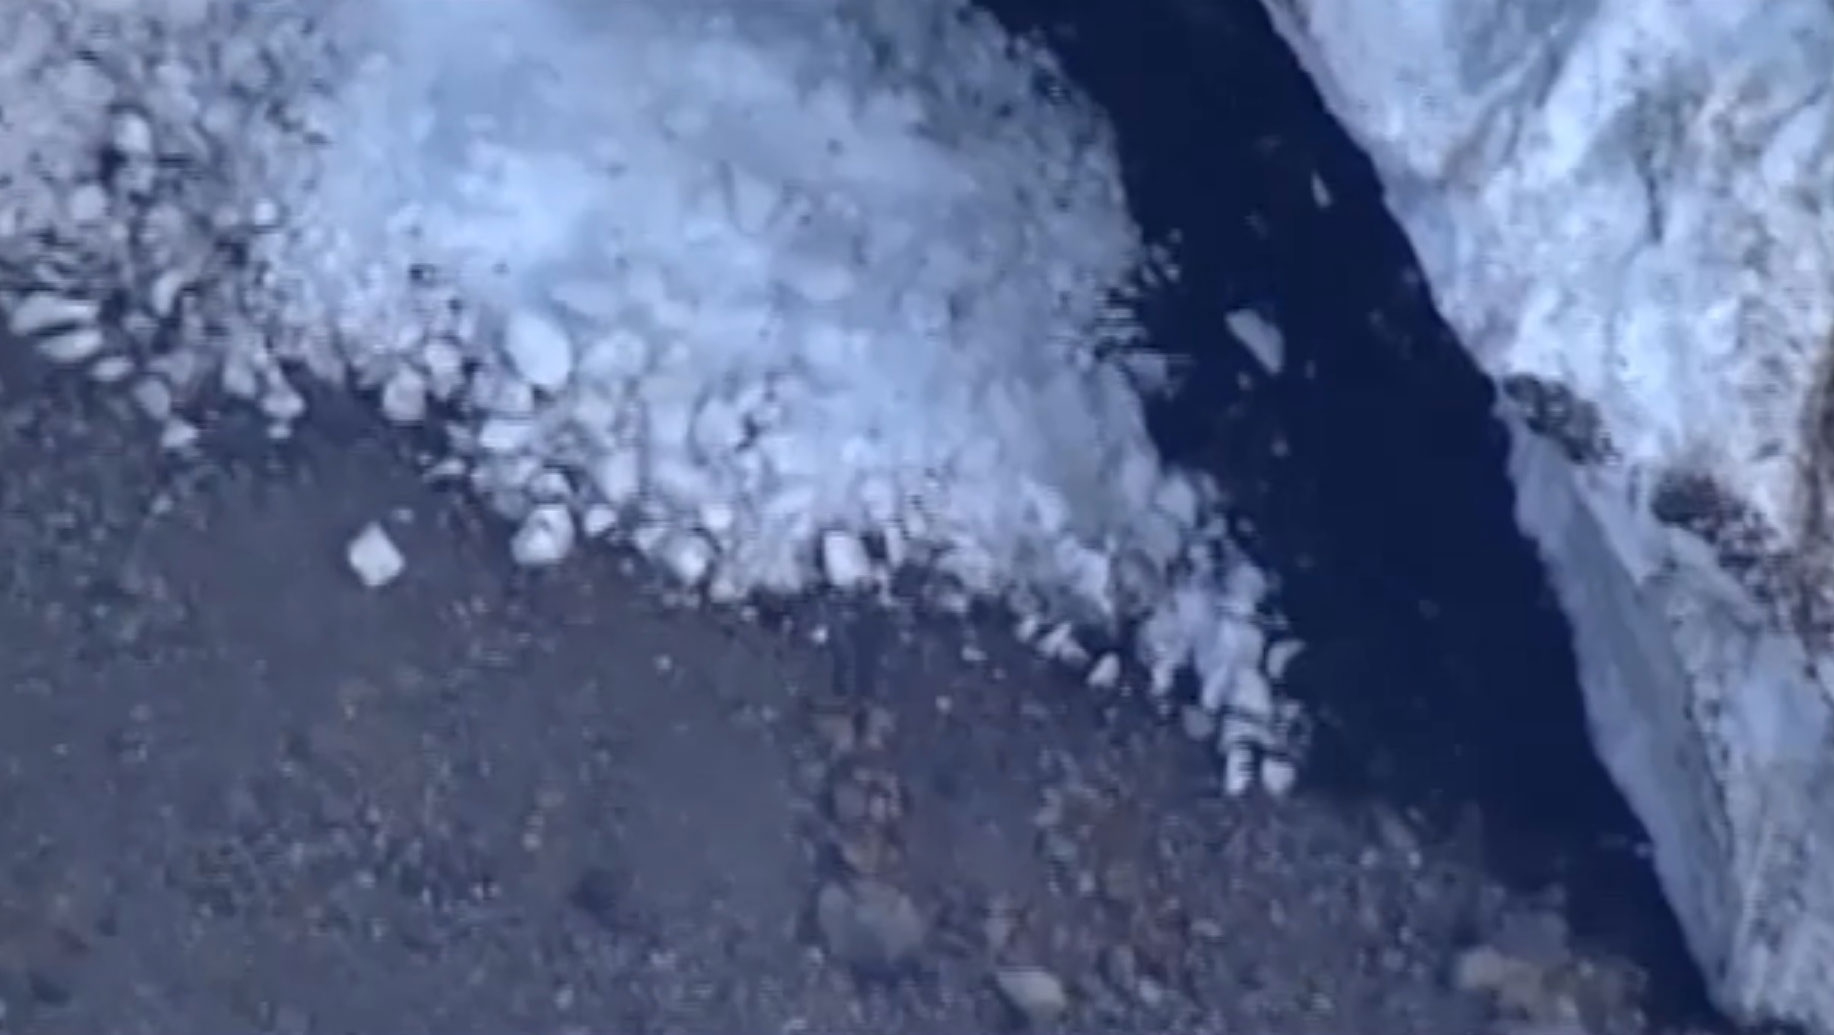 Possible injuries in Wash. ice cave collapse, police say - CBS News